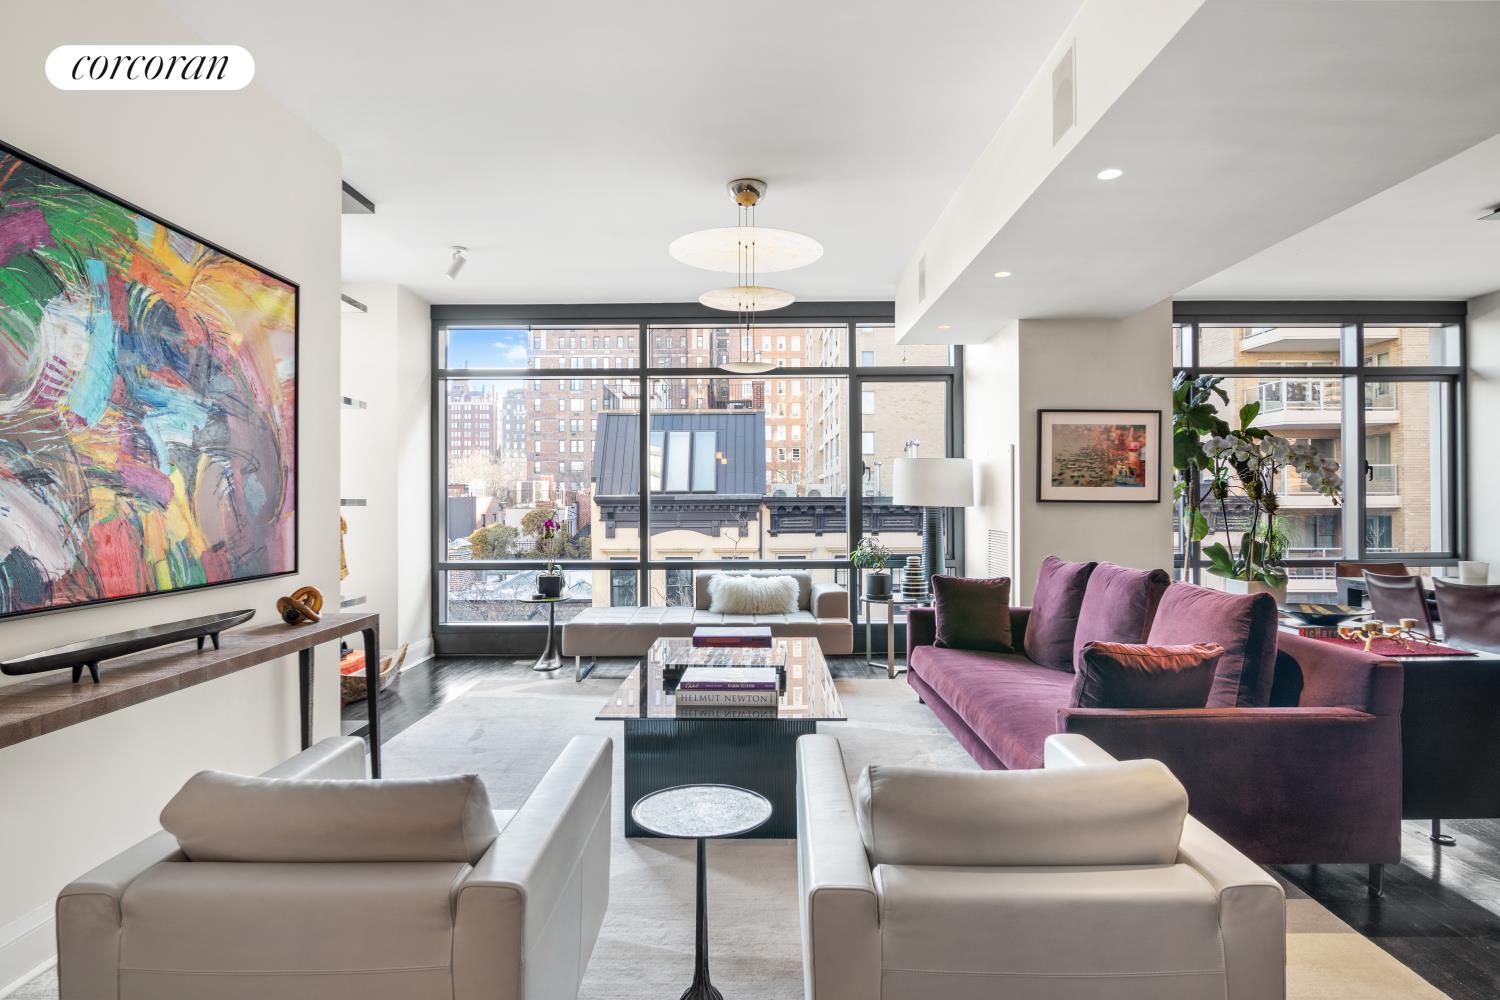 170 East End Avenue 5Ab, Yorkville, Upper East Side, NYC - 3 Bedrooms  
3.5 Bathrooms  
9 Rooms - 